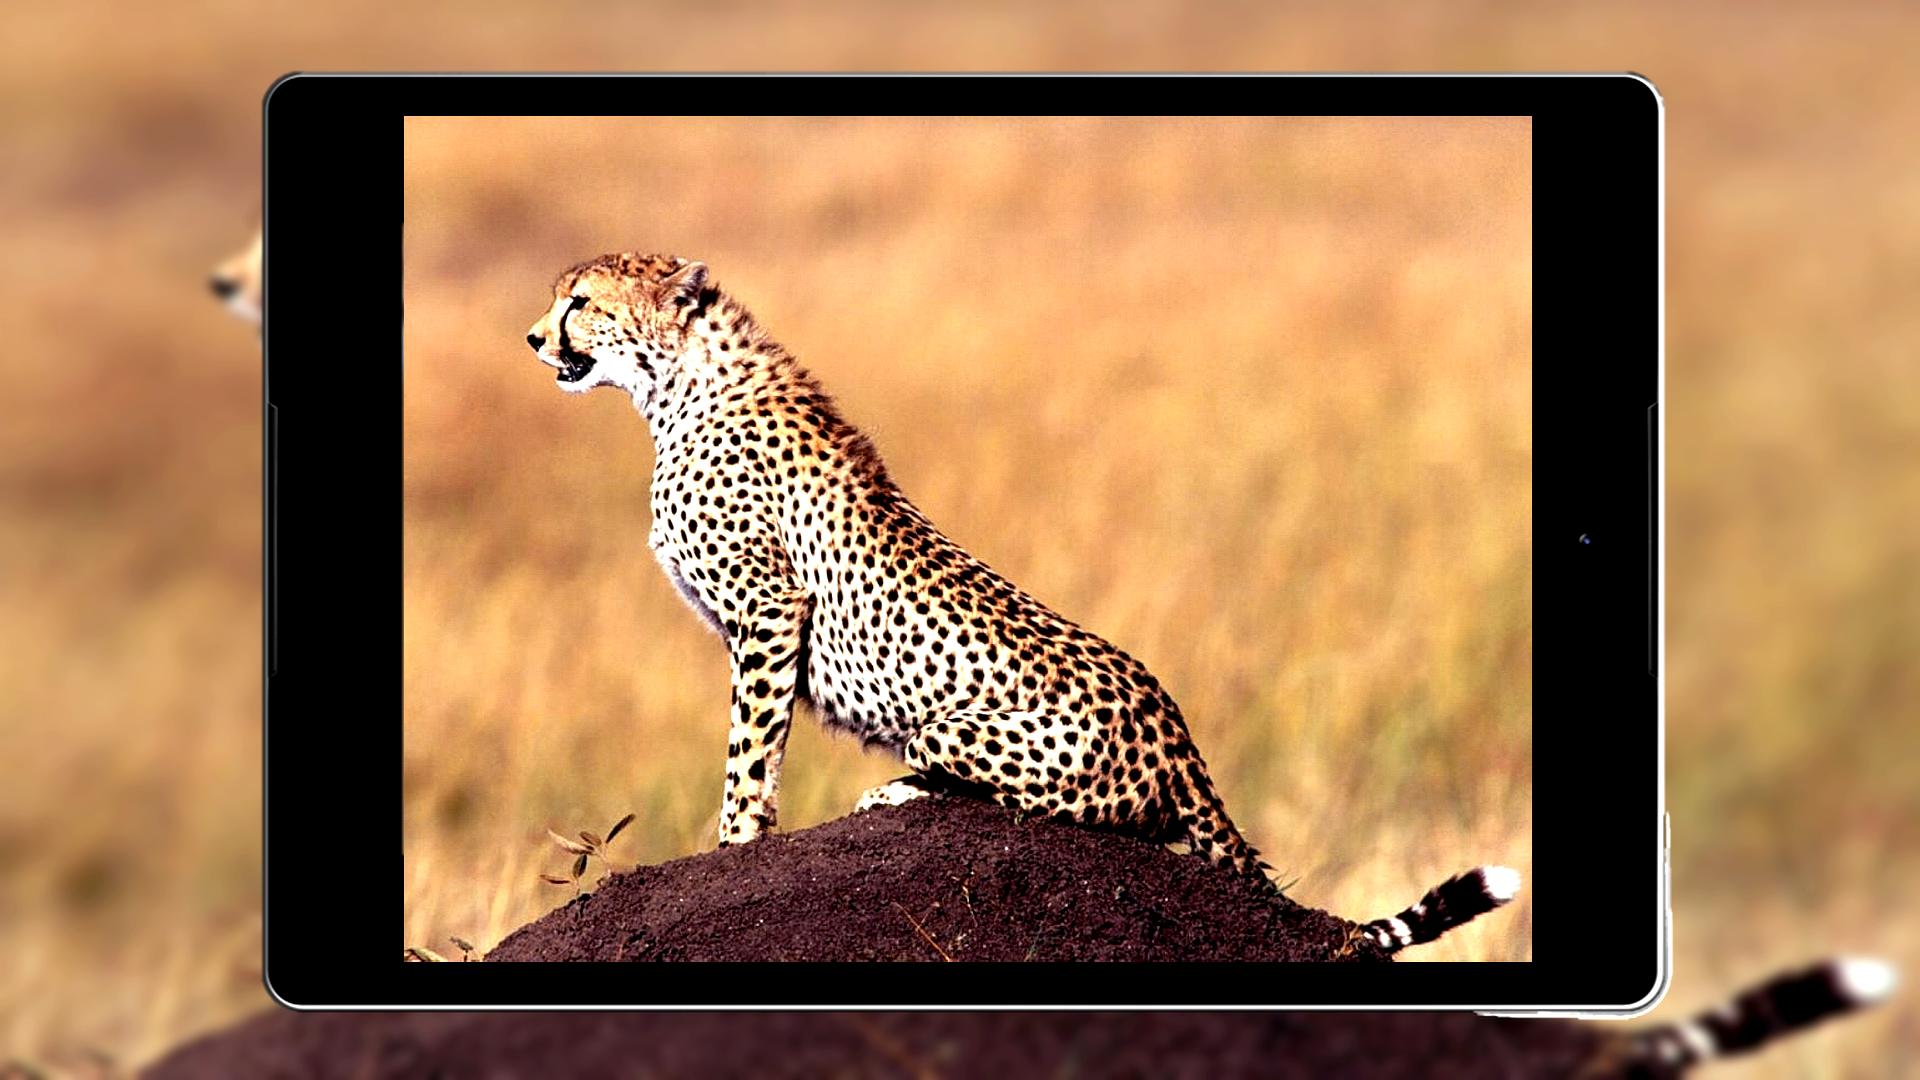 Cheetah Wallpapers Hd For Android Apk Download